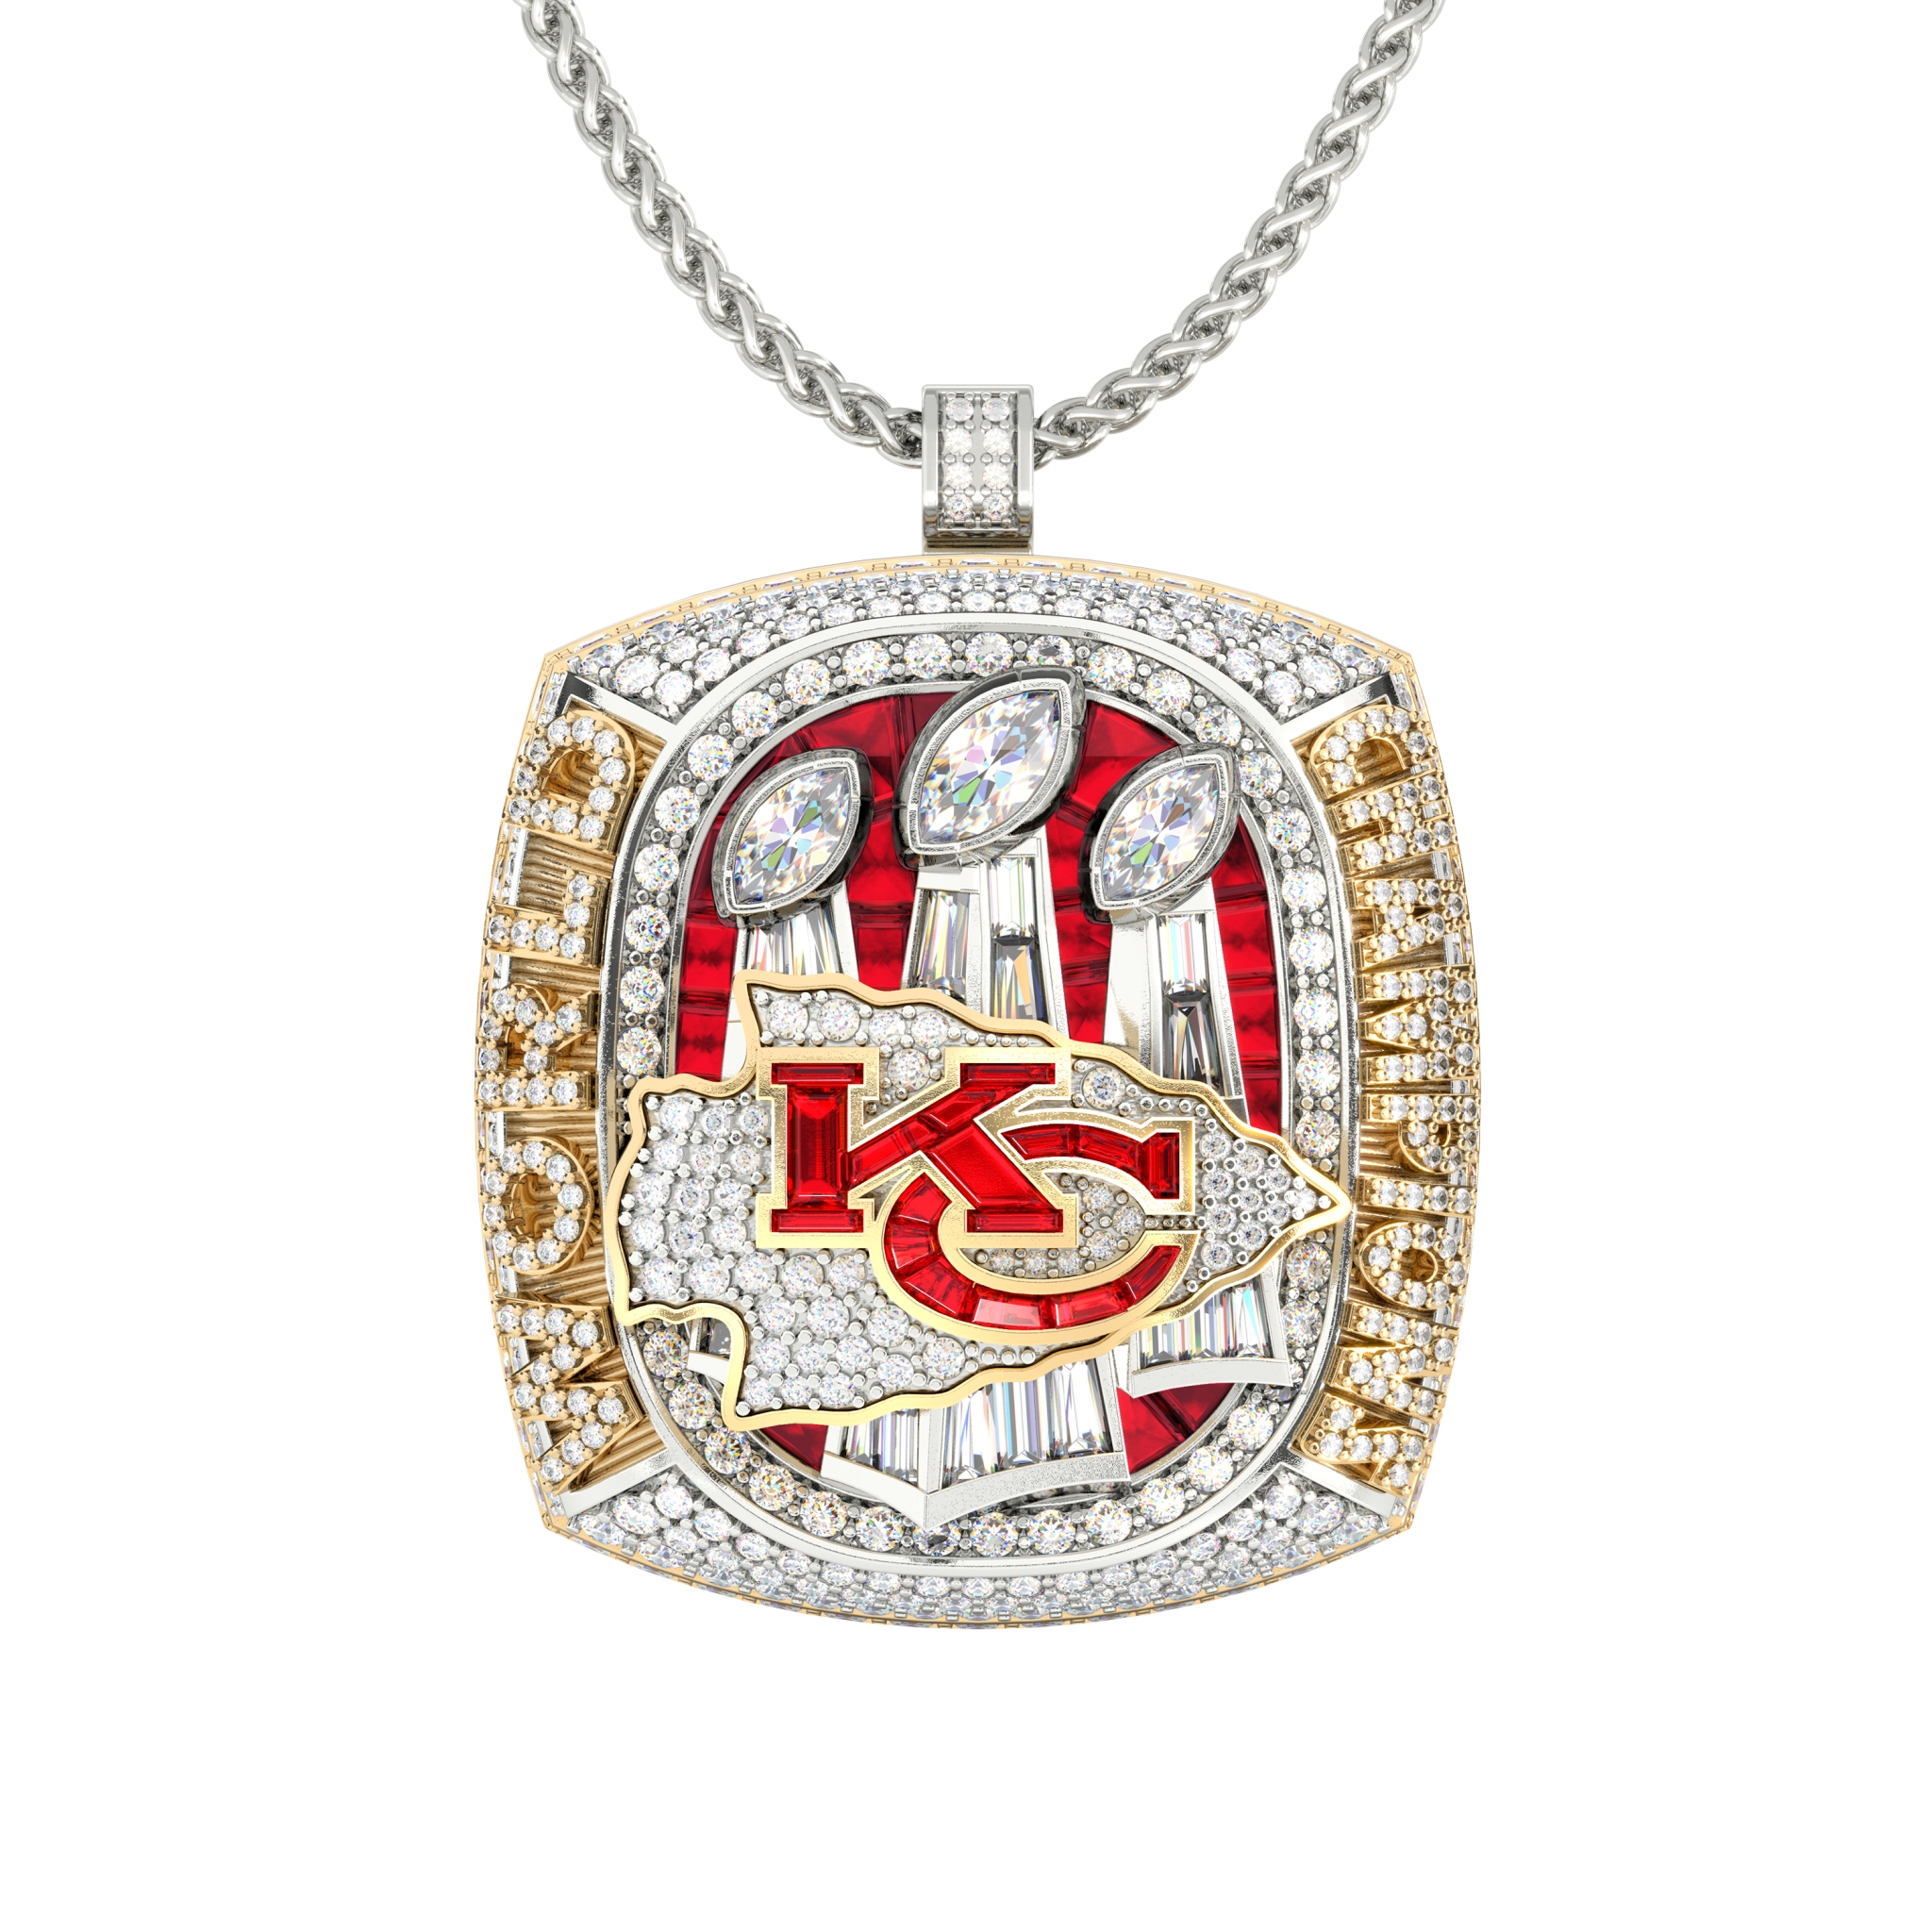 An Inside Look at Kansas City Chief's Super Bowl LVII Ring - Only Natural  Diamonds